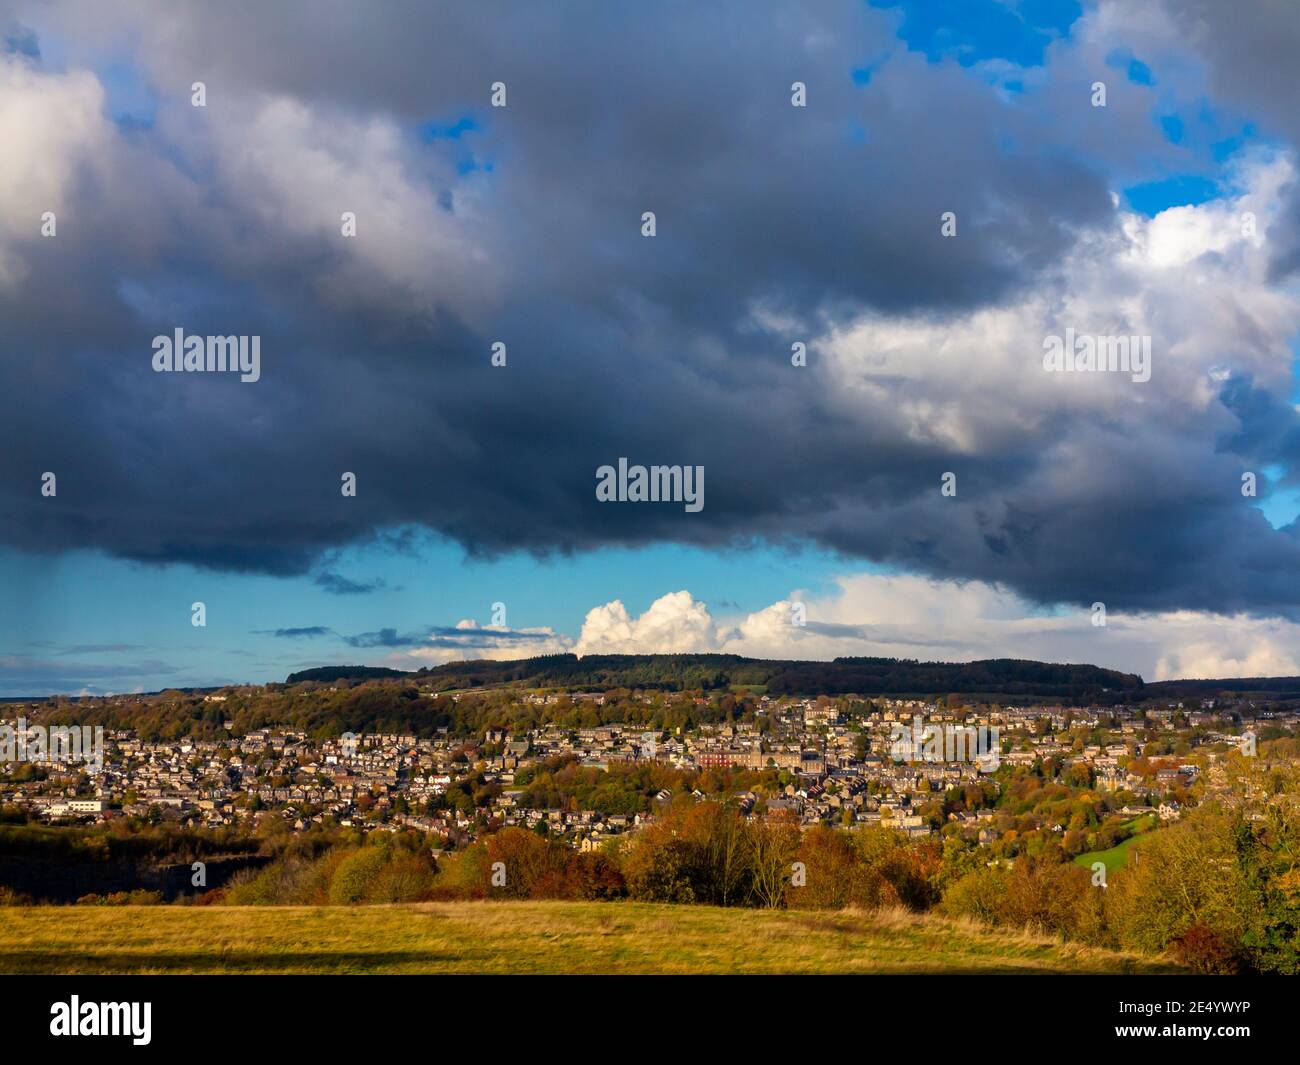 Stormy sky with dark clouds over Matlock the county town of Derbyshire in the Peak District Derbyshire Dales England UK Stock Photo